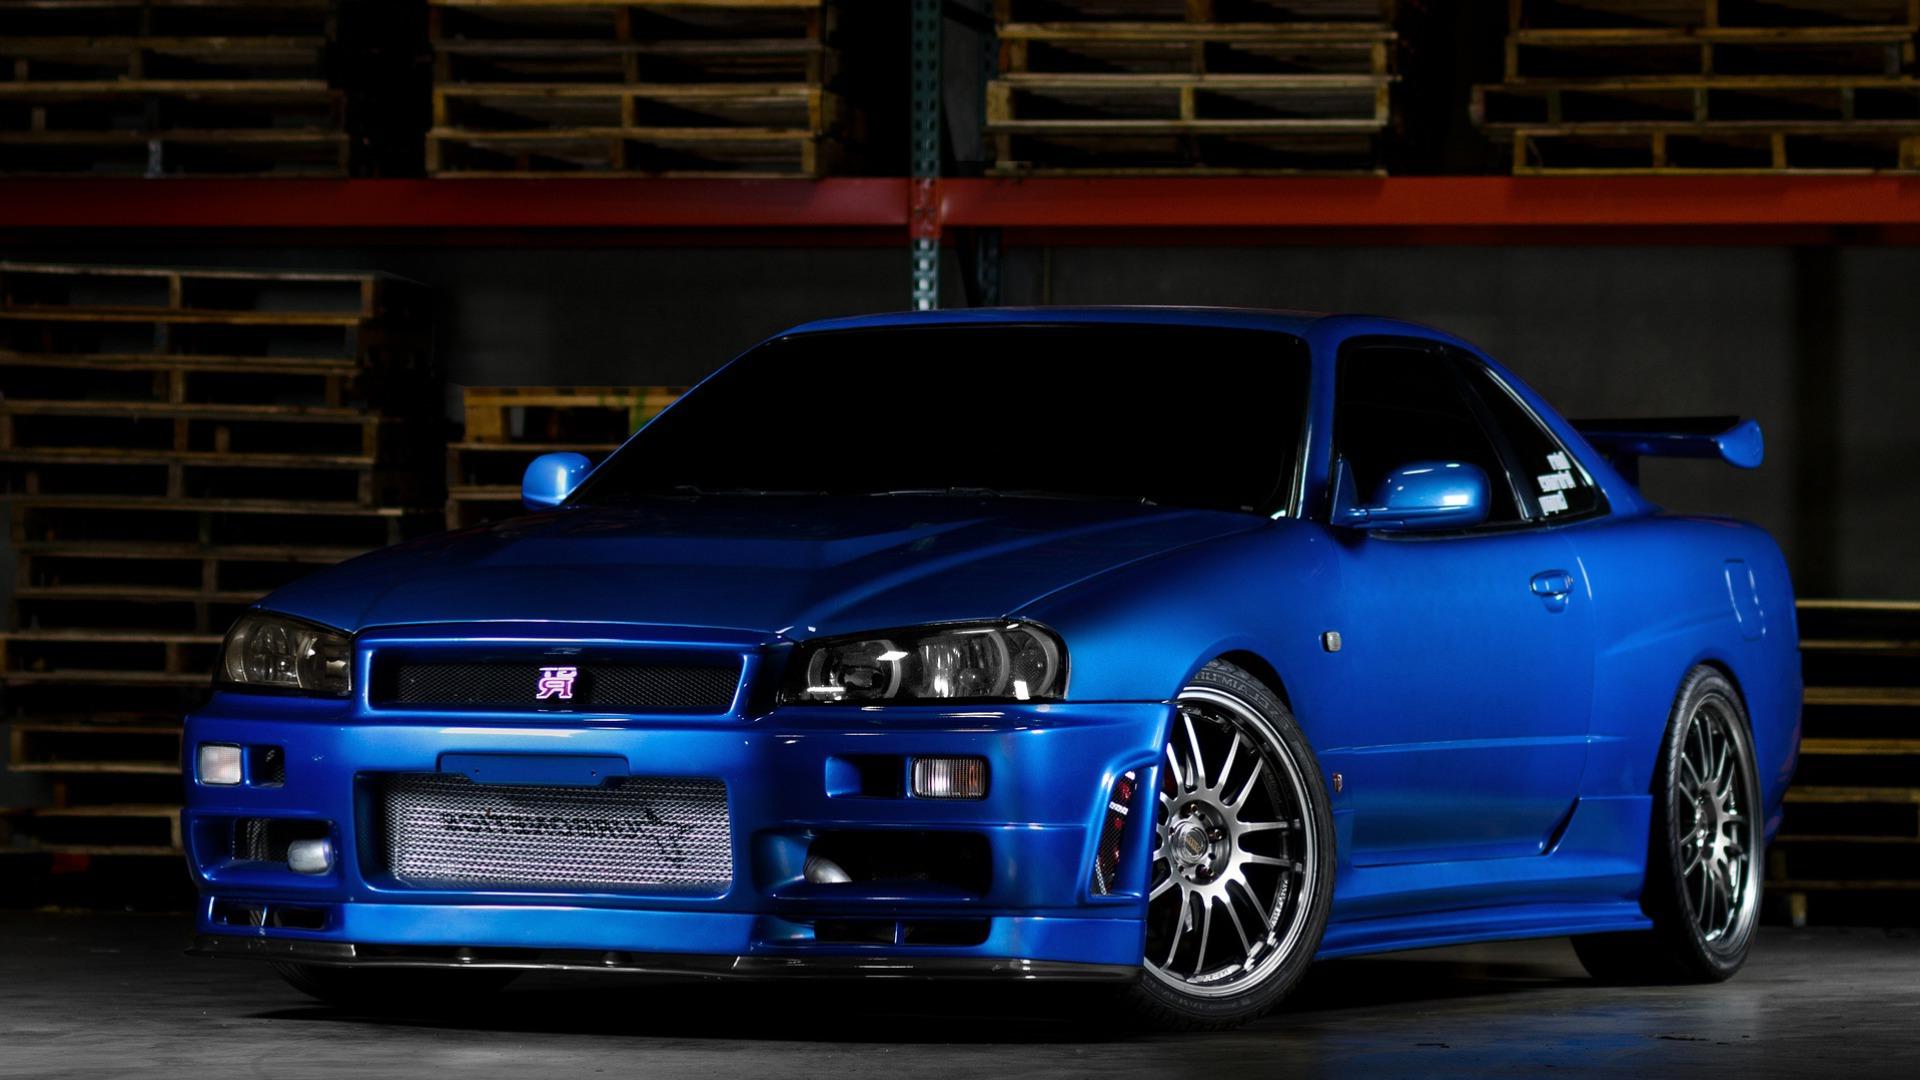 Skyline R34 Wallpaper. HD Background Image. Photo. Picture